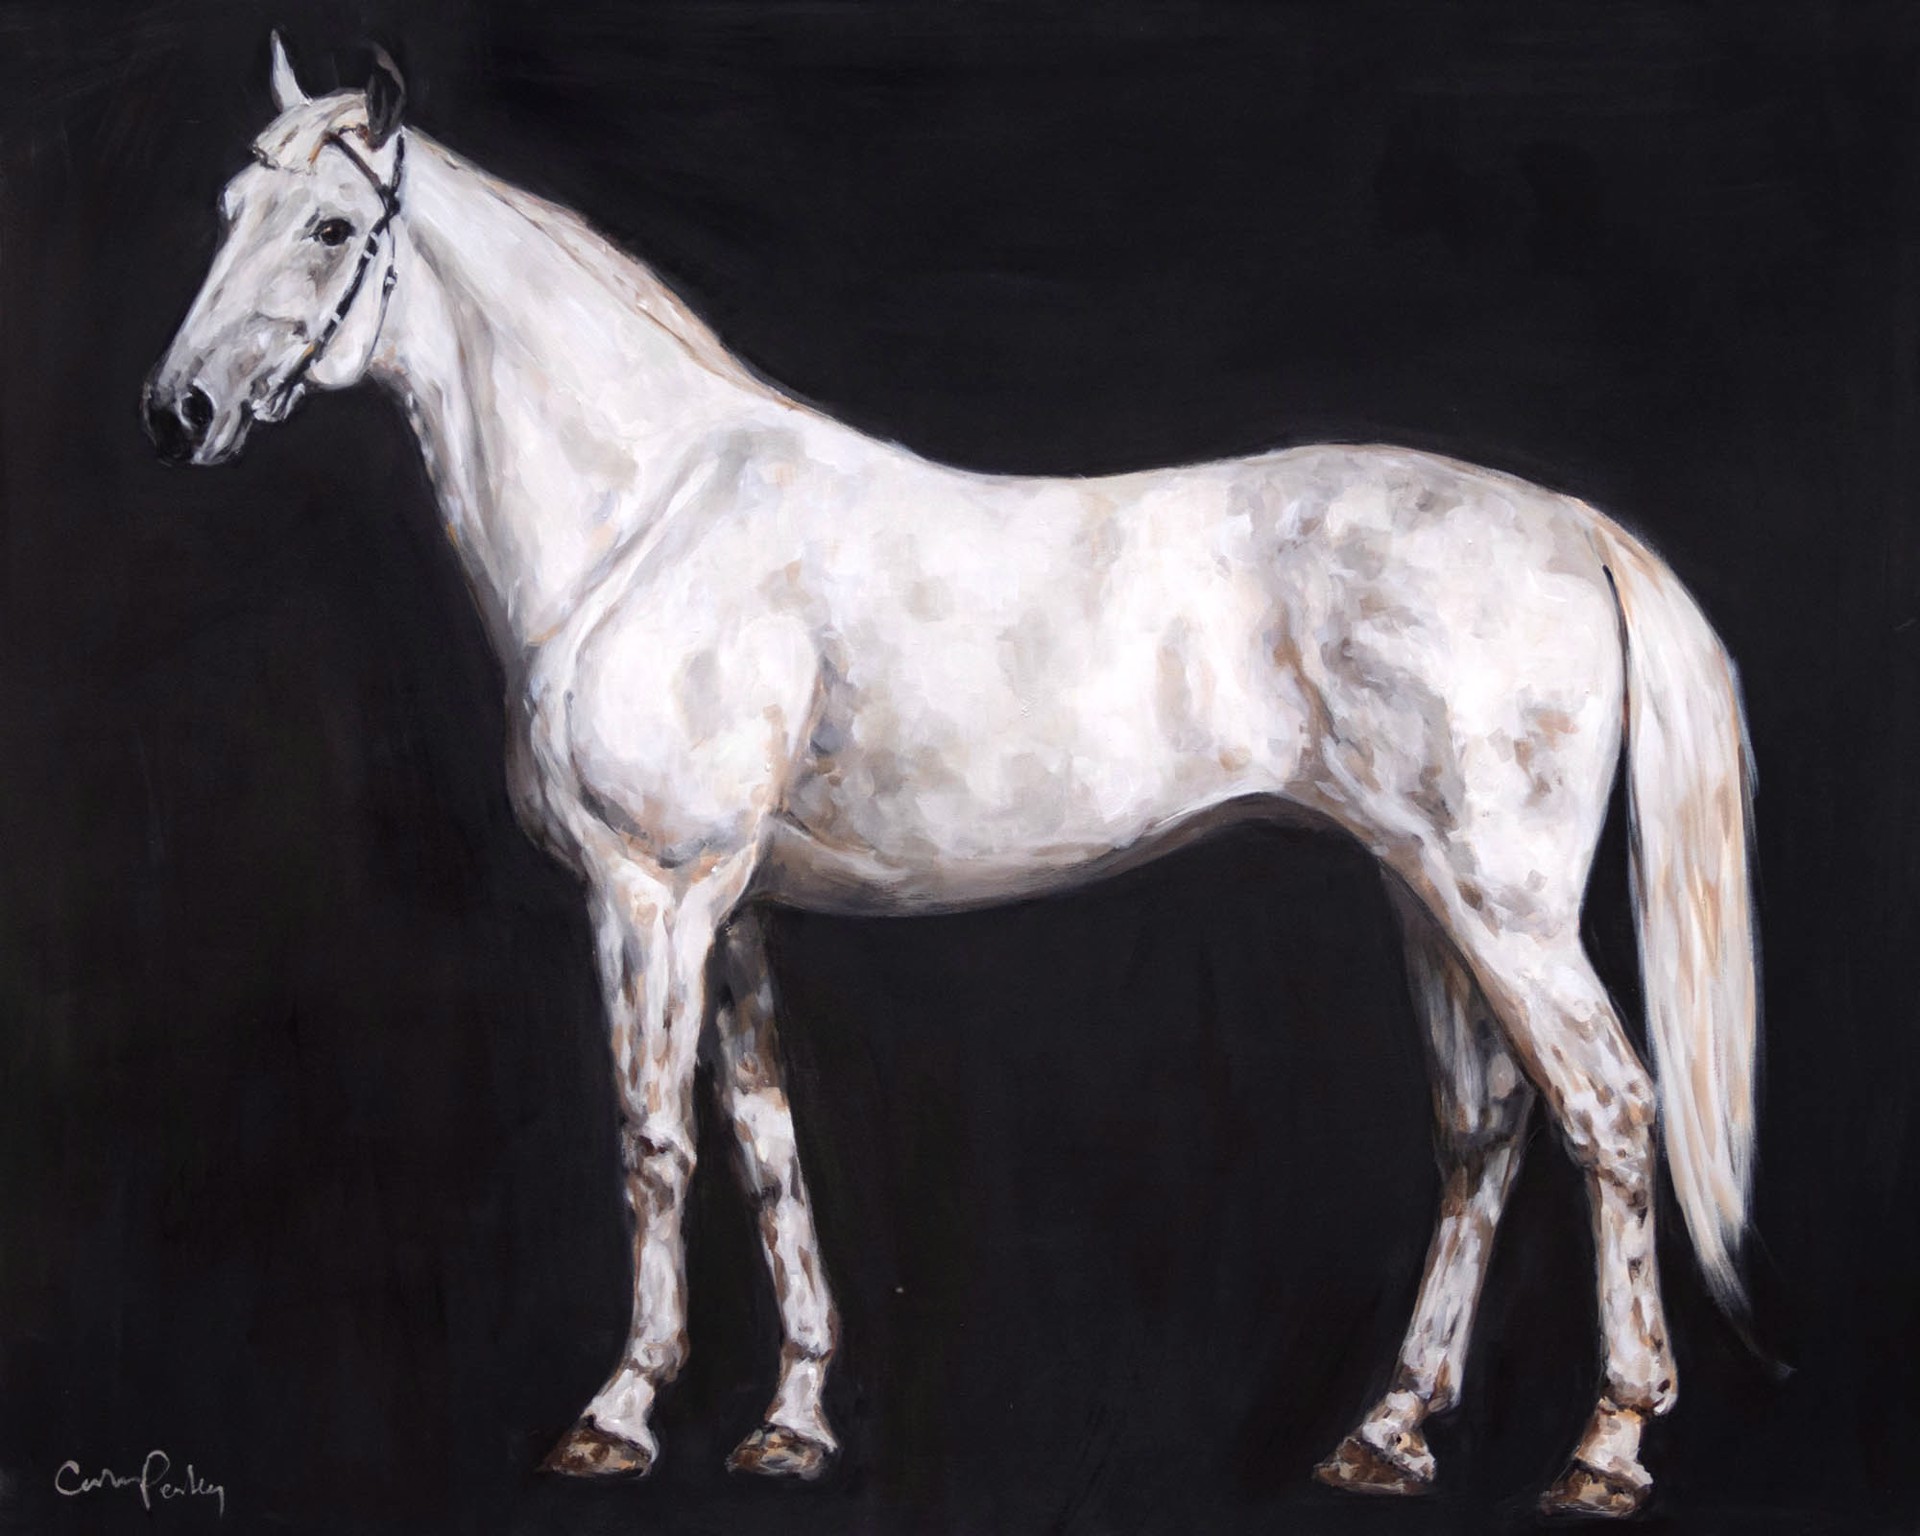 Original Acrylic Painting Featuring A Full Body White Horse Portrait On Black Background